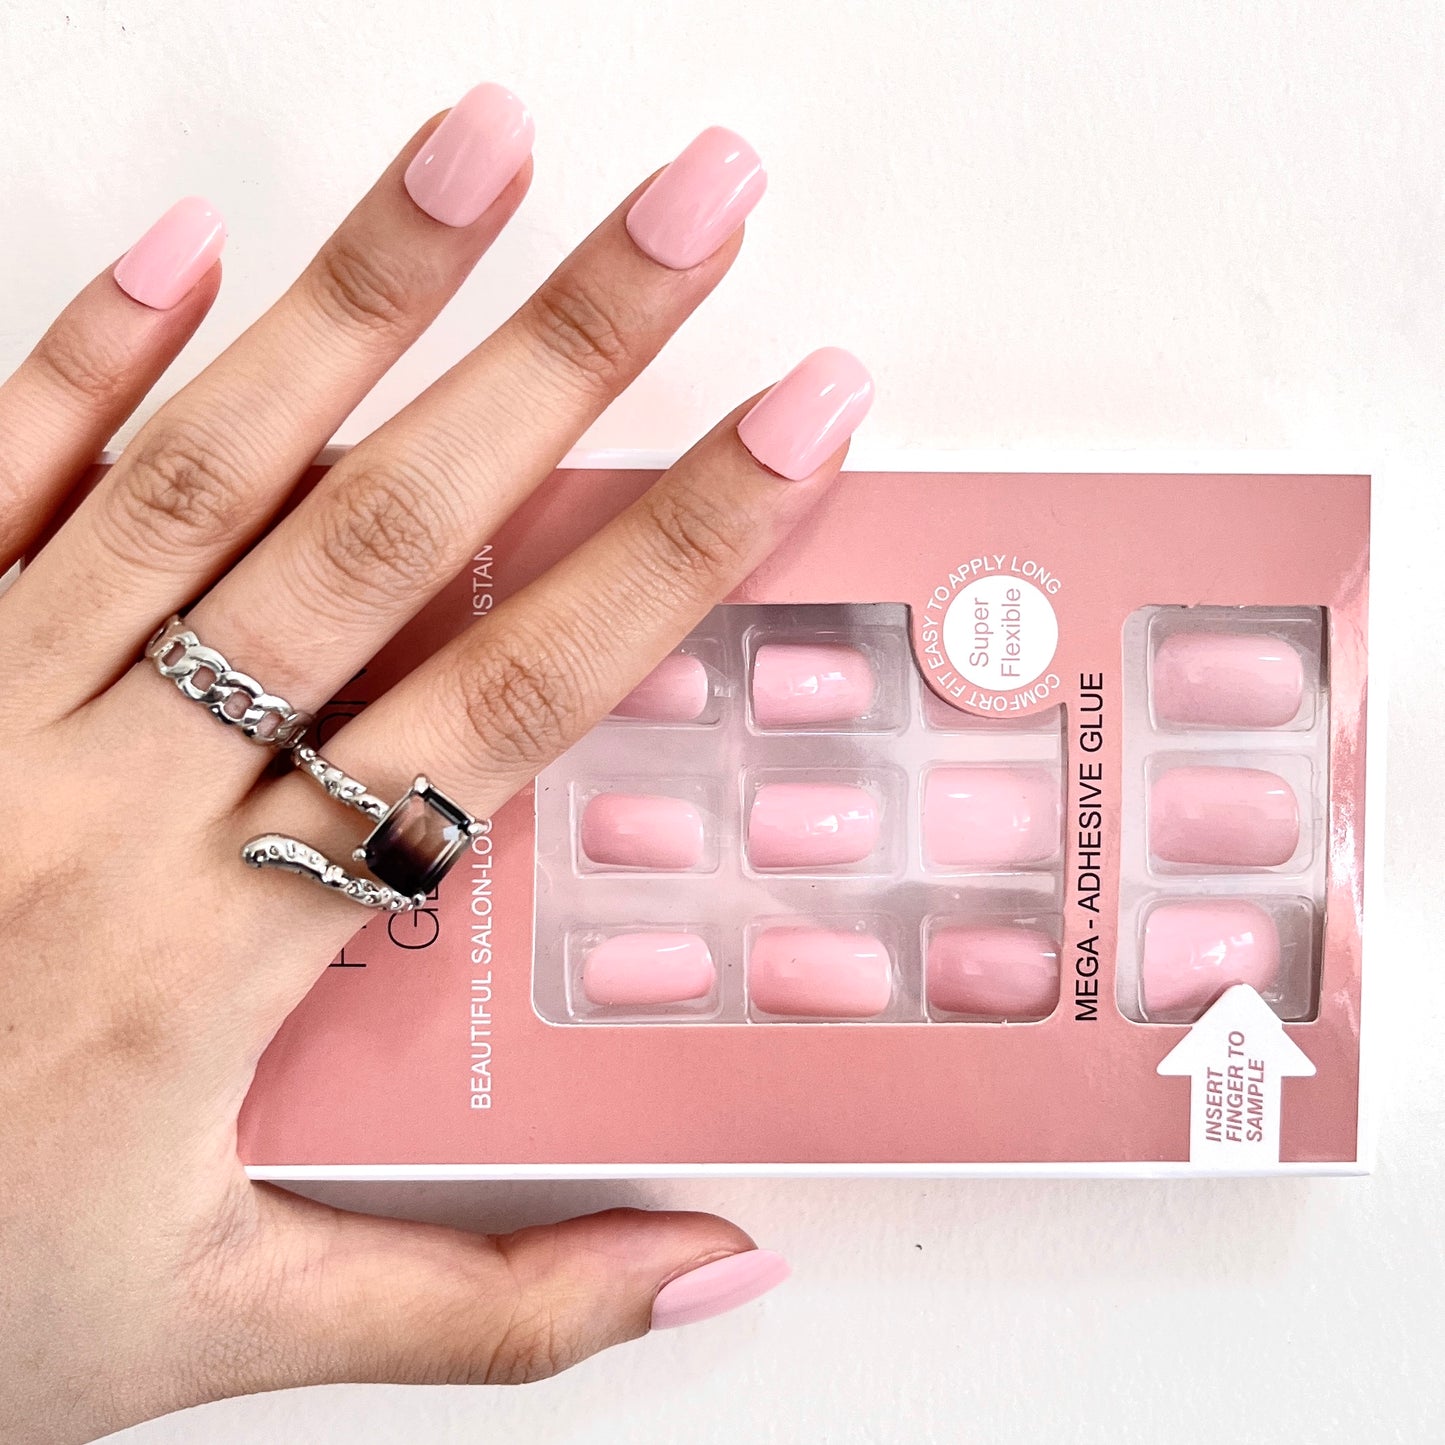 Pastel Color/ Solid Color Squoval Short Fake Nails Pink 0061-S225 Press ons Flase Nails Press On Nails Tips Salon